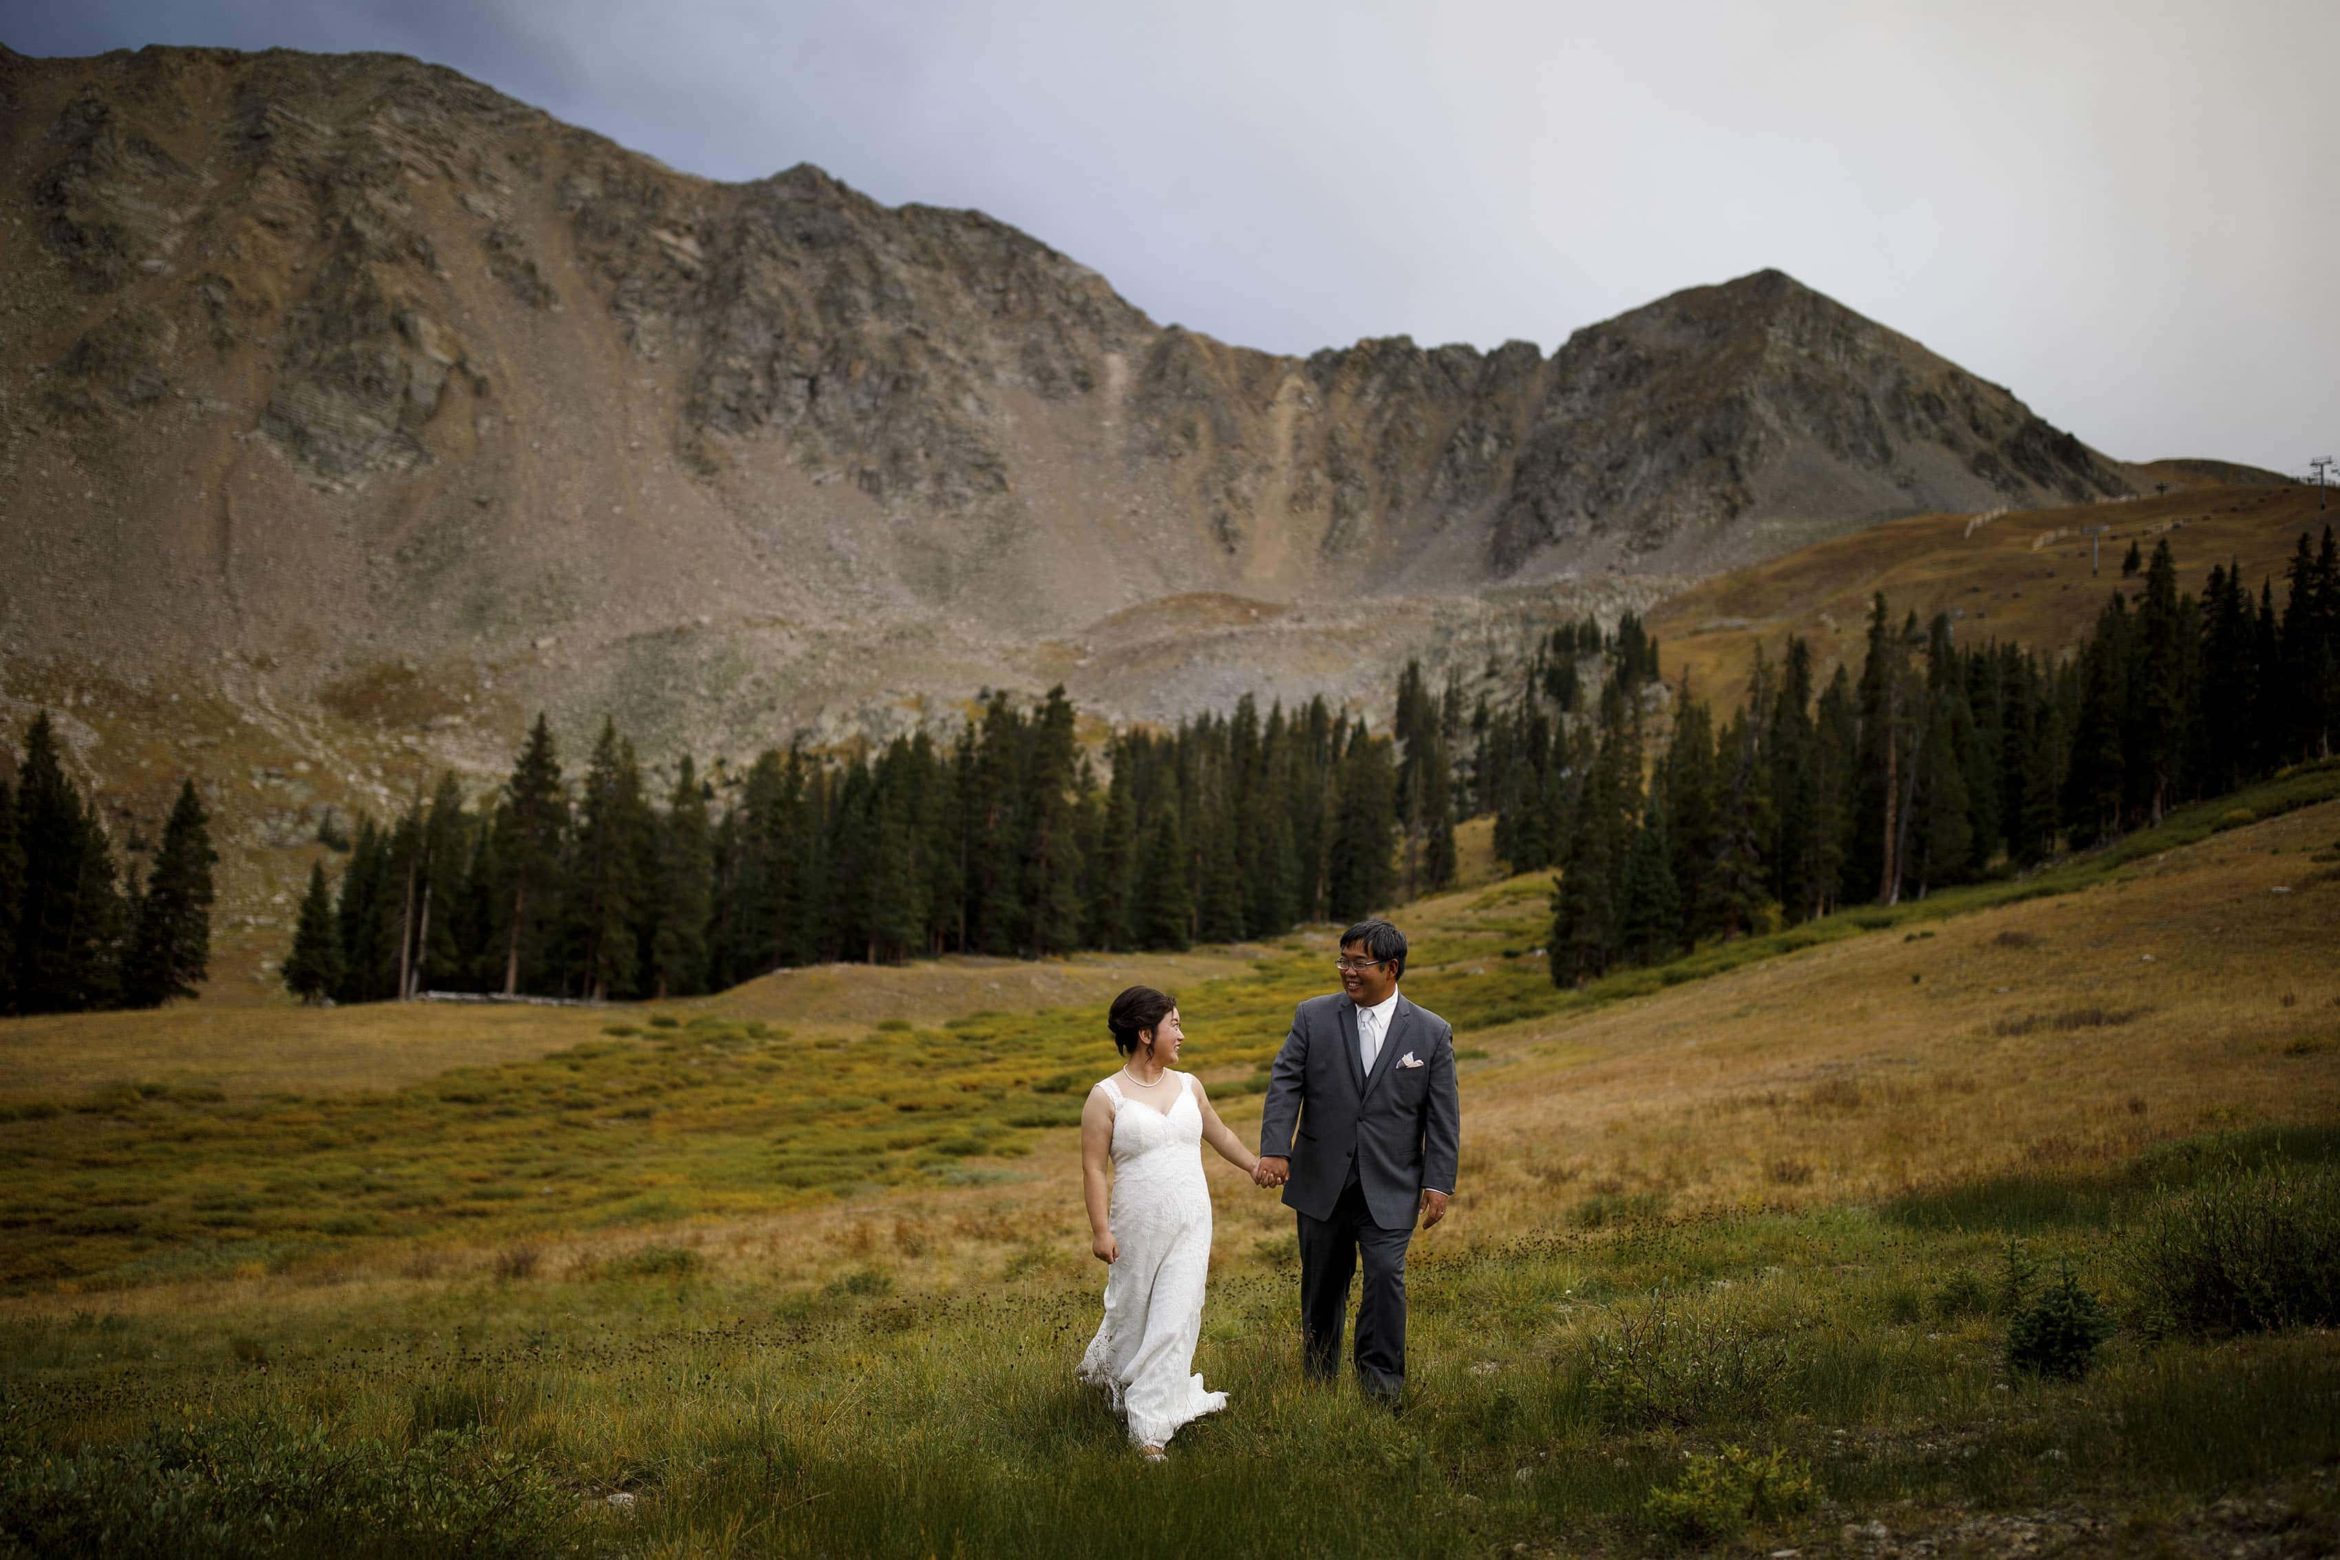 David and Xinya walks together in the field near the East Wall at A Basin during their wedding